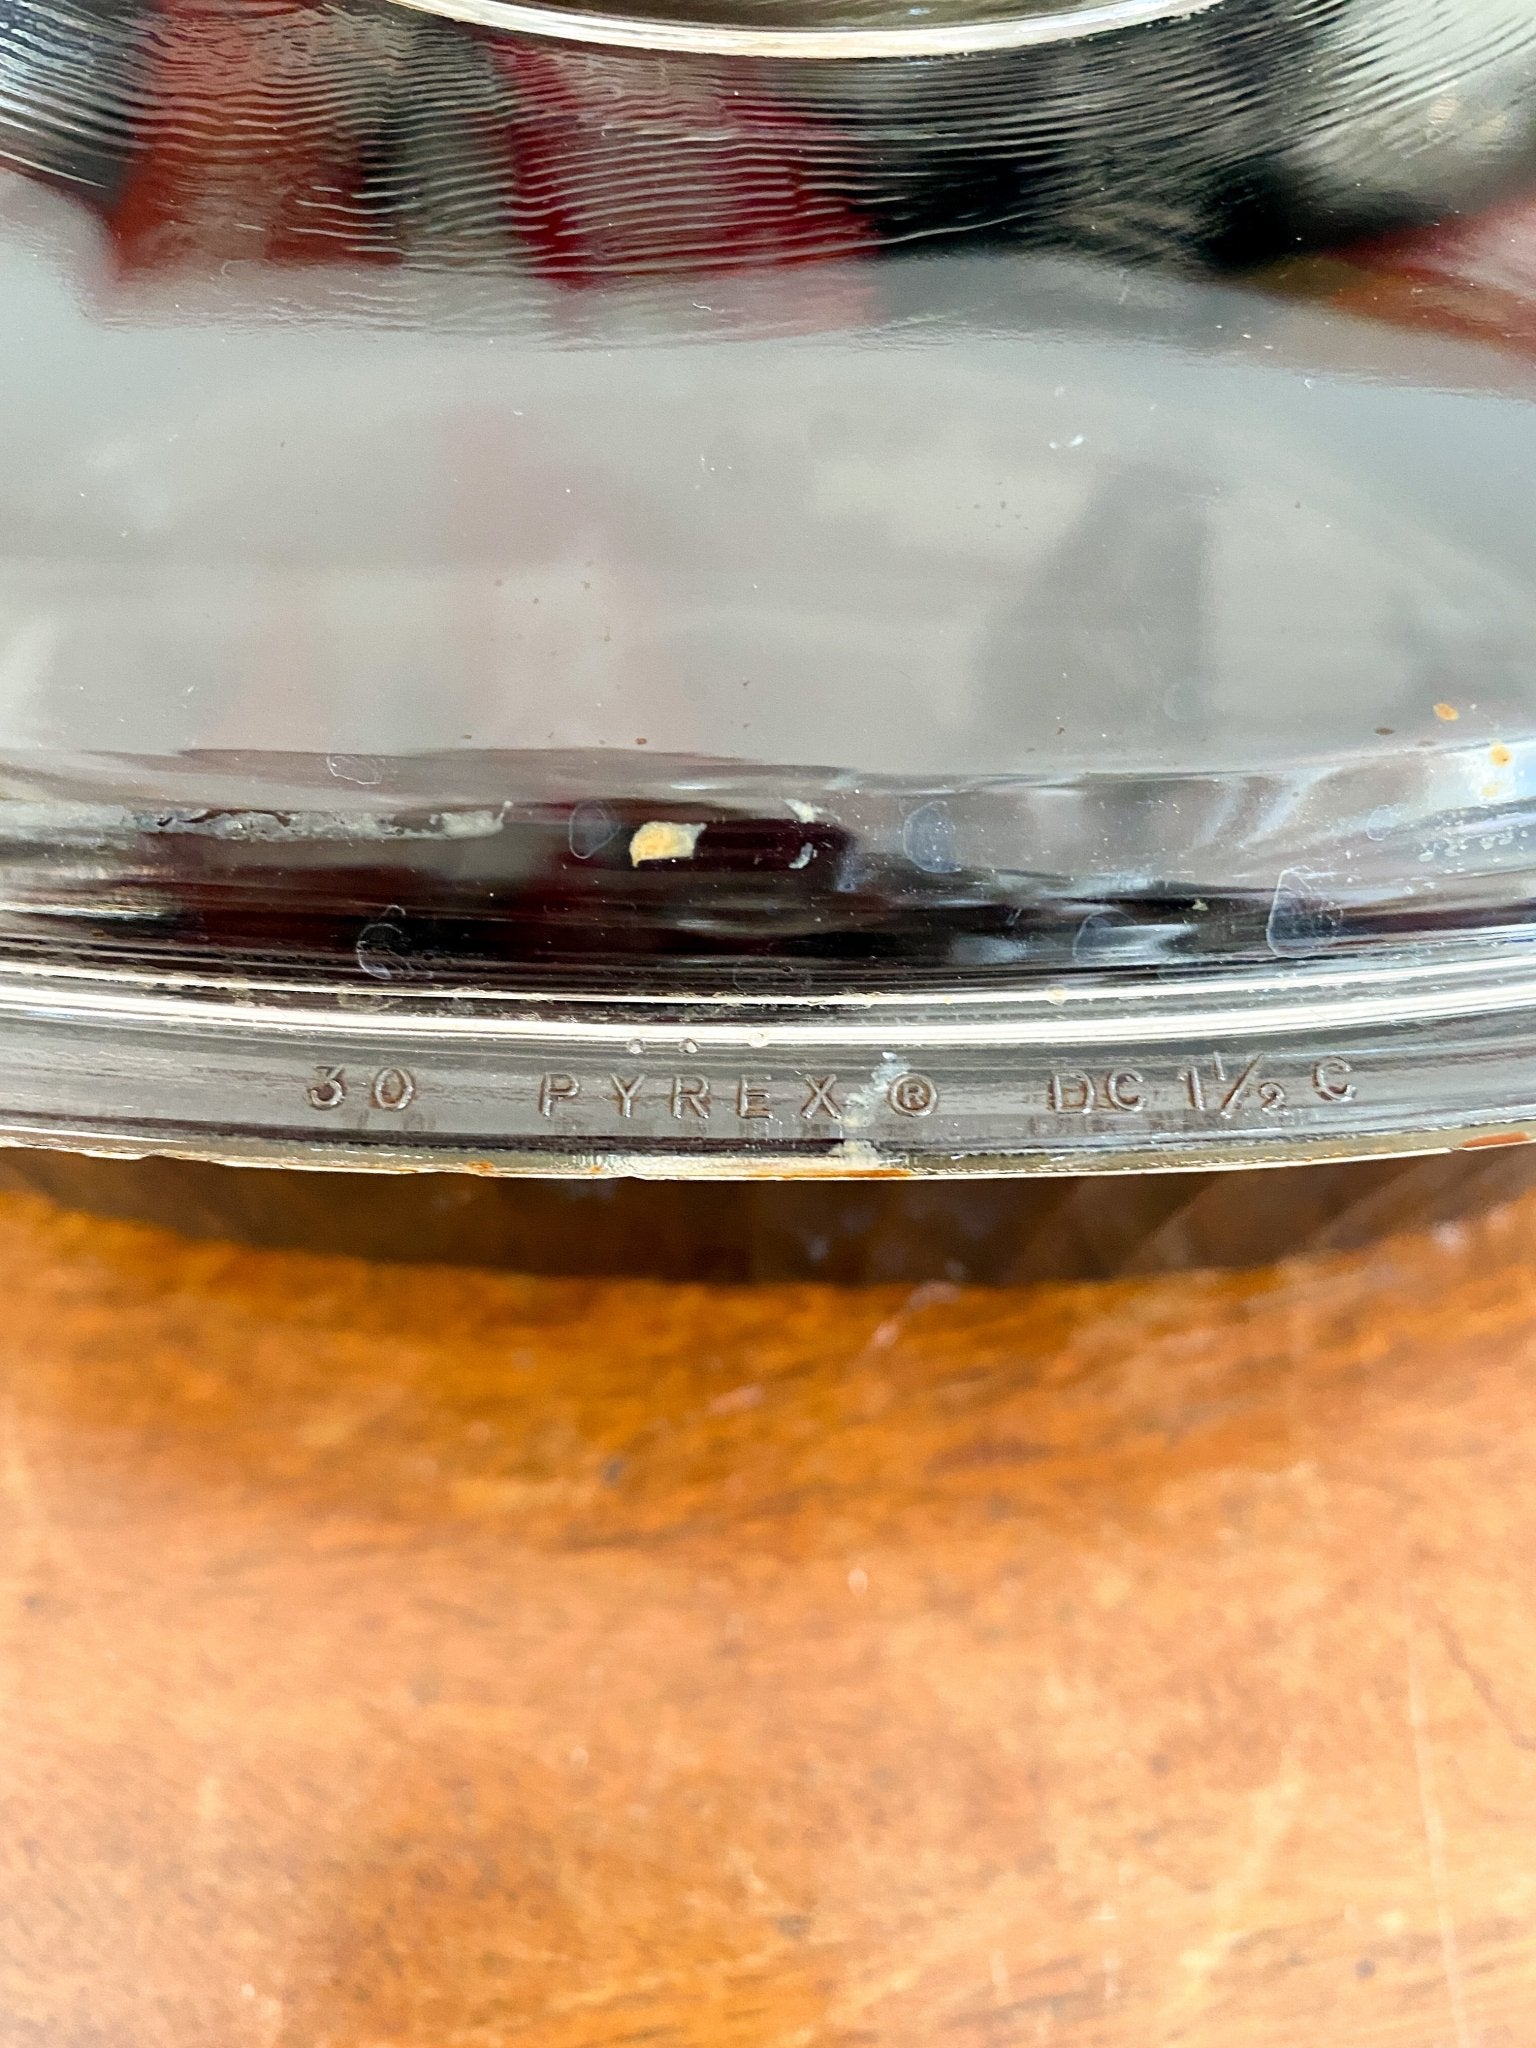 A close up of the clear glass lid on top of the black dish. The lid reads "30 Pyrex DC 1 and 1 half C"